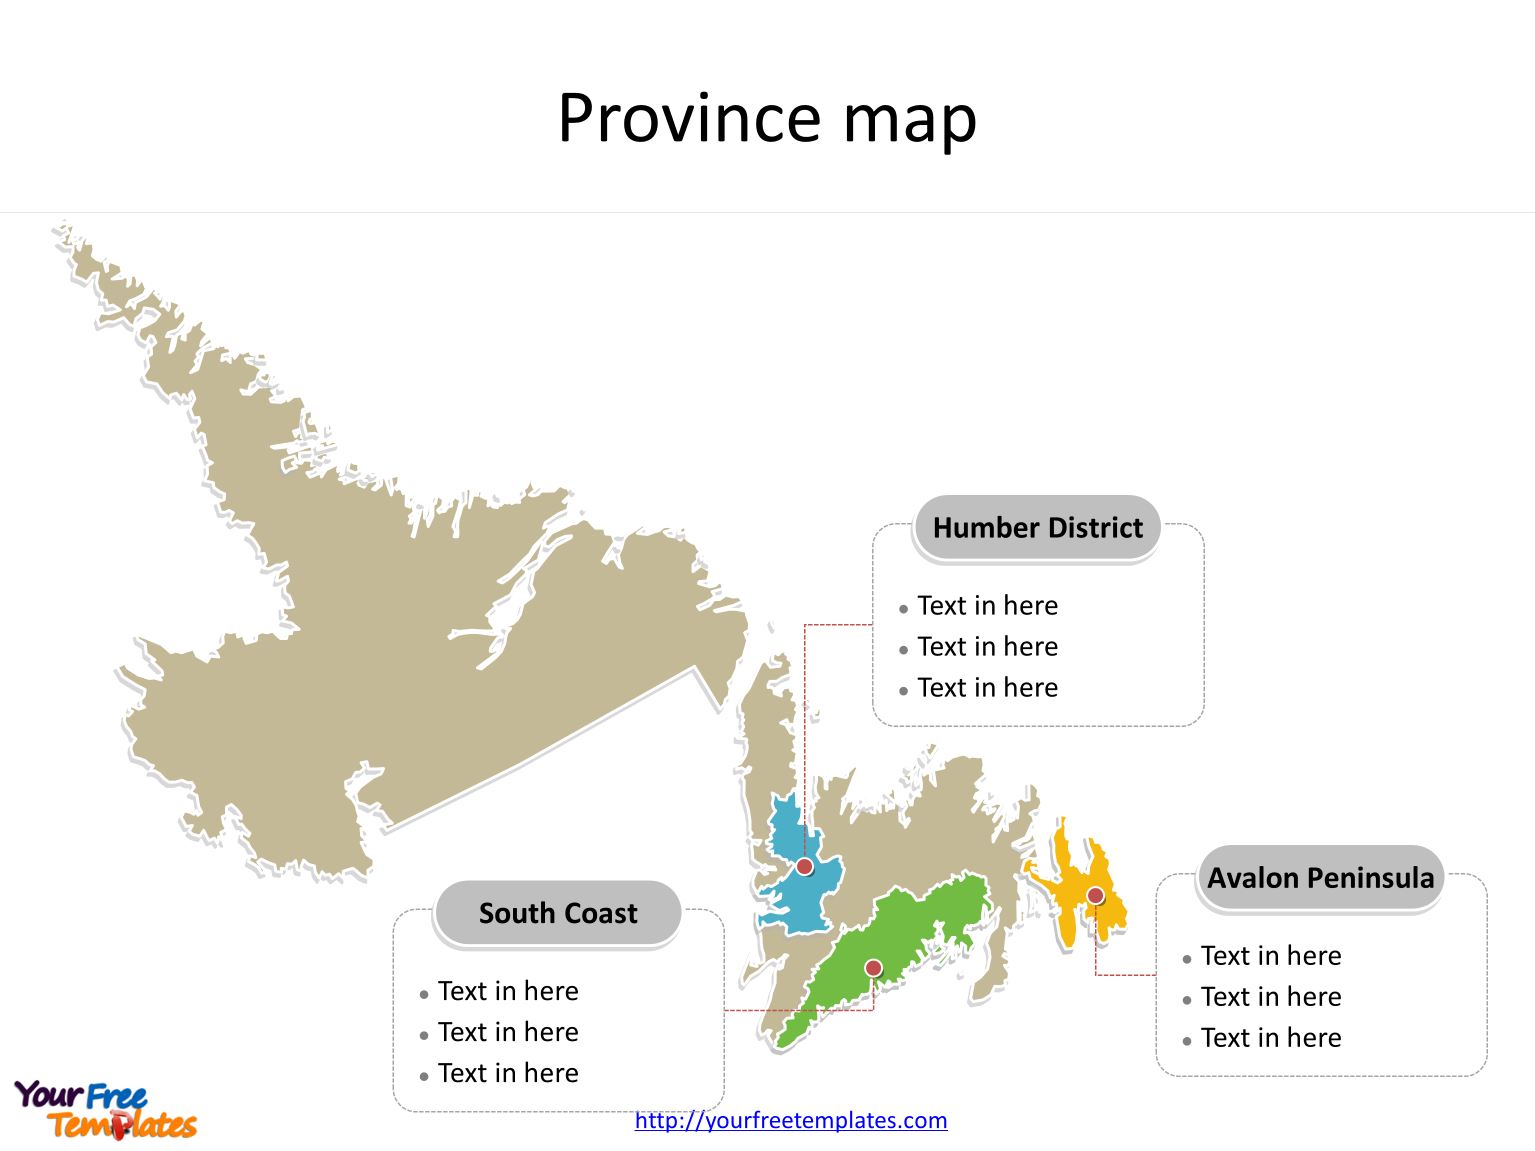 Province of Newfoundland and Labrador map with most populated census divisions labeled on the Newfoundland and Labrador maps PowerPoint templates